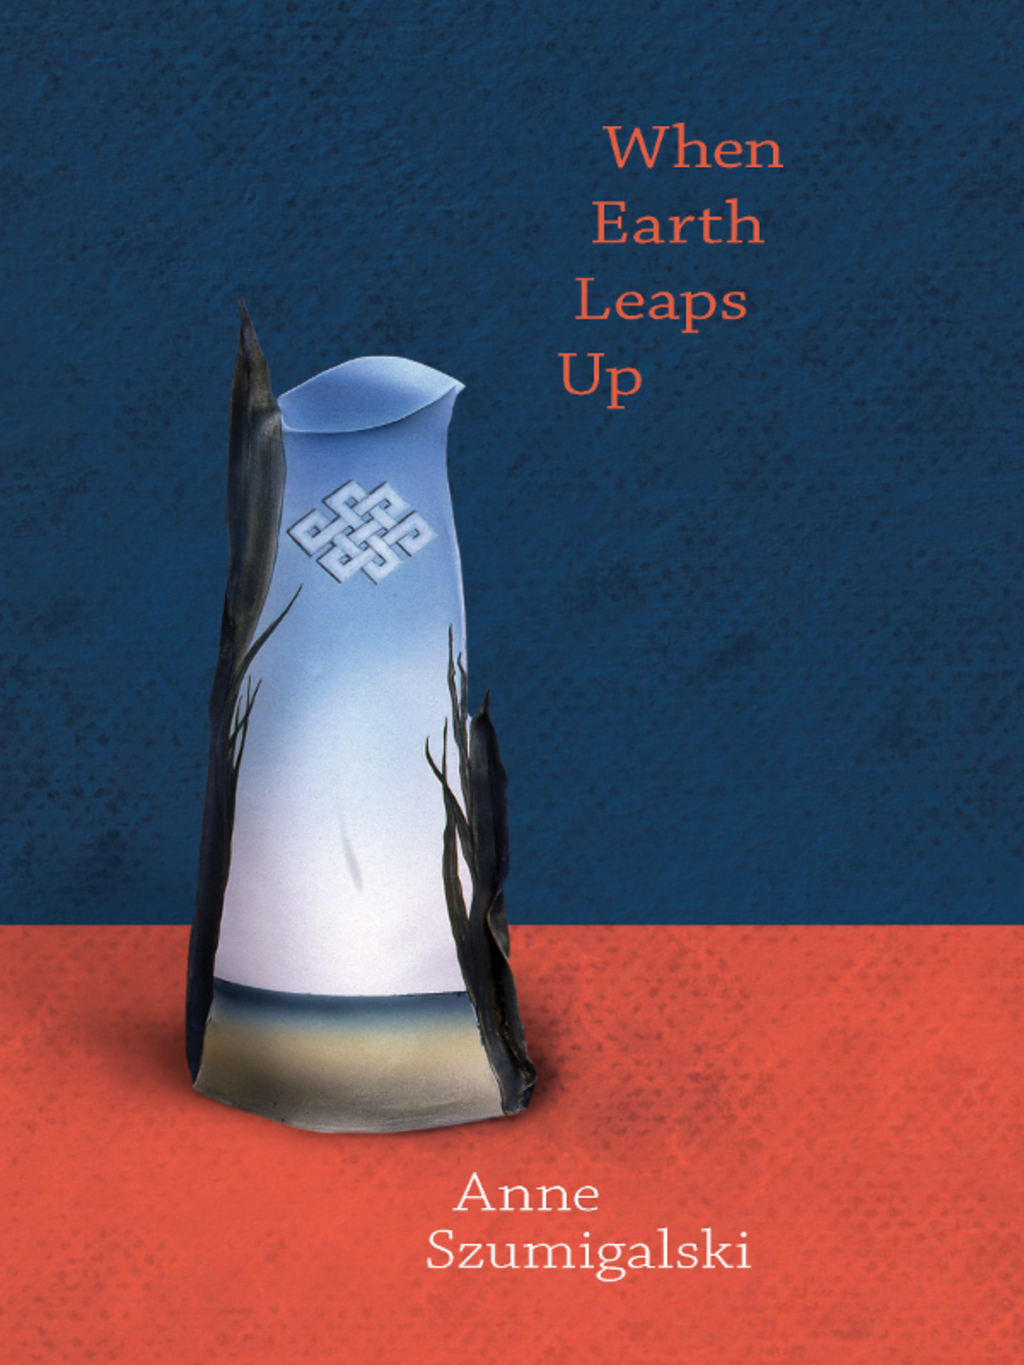 When Earth Leaps Up (eBook Rental)